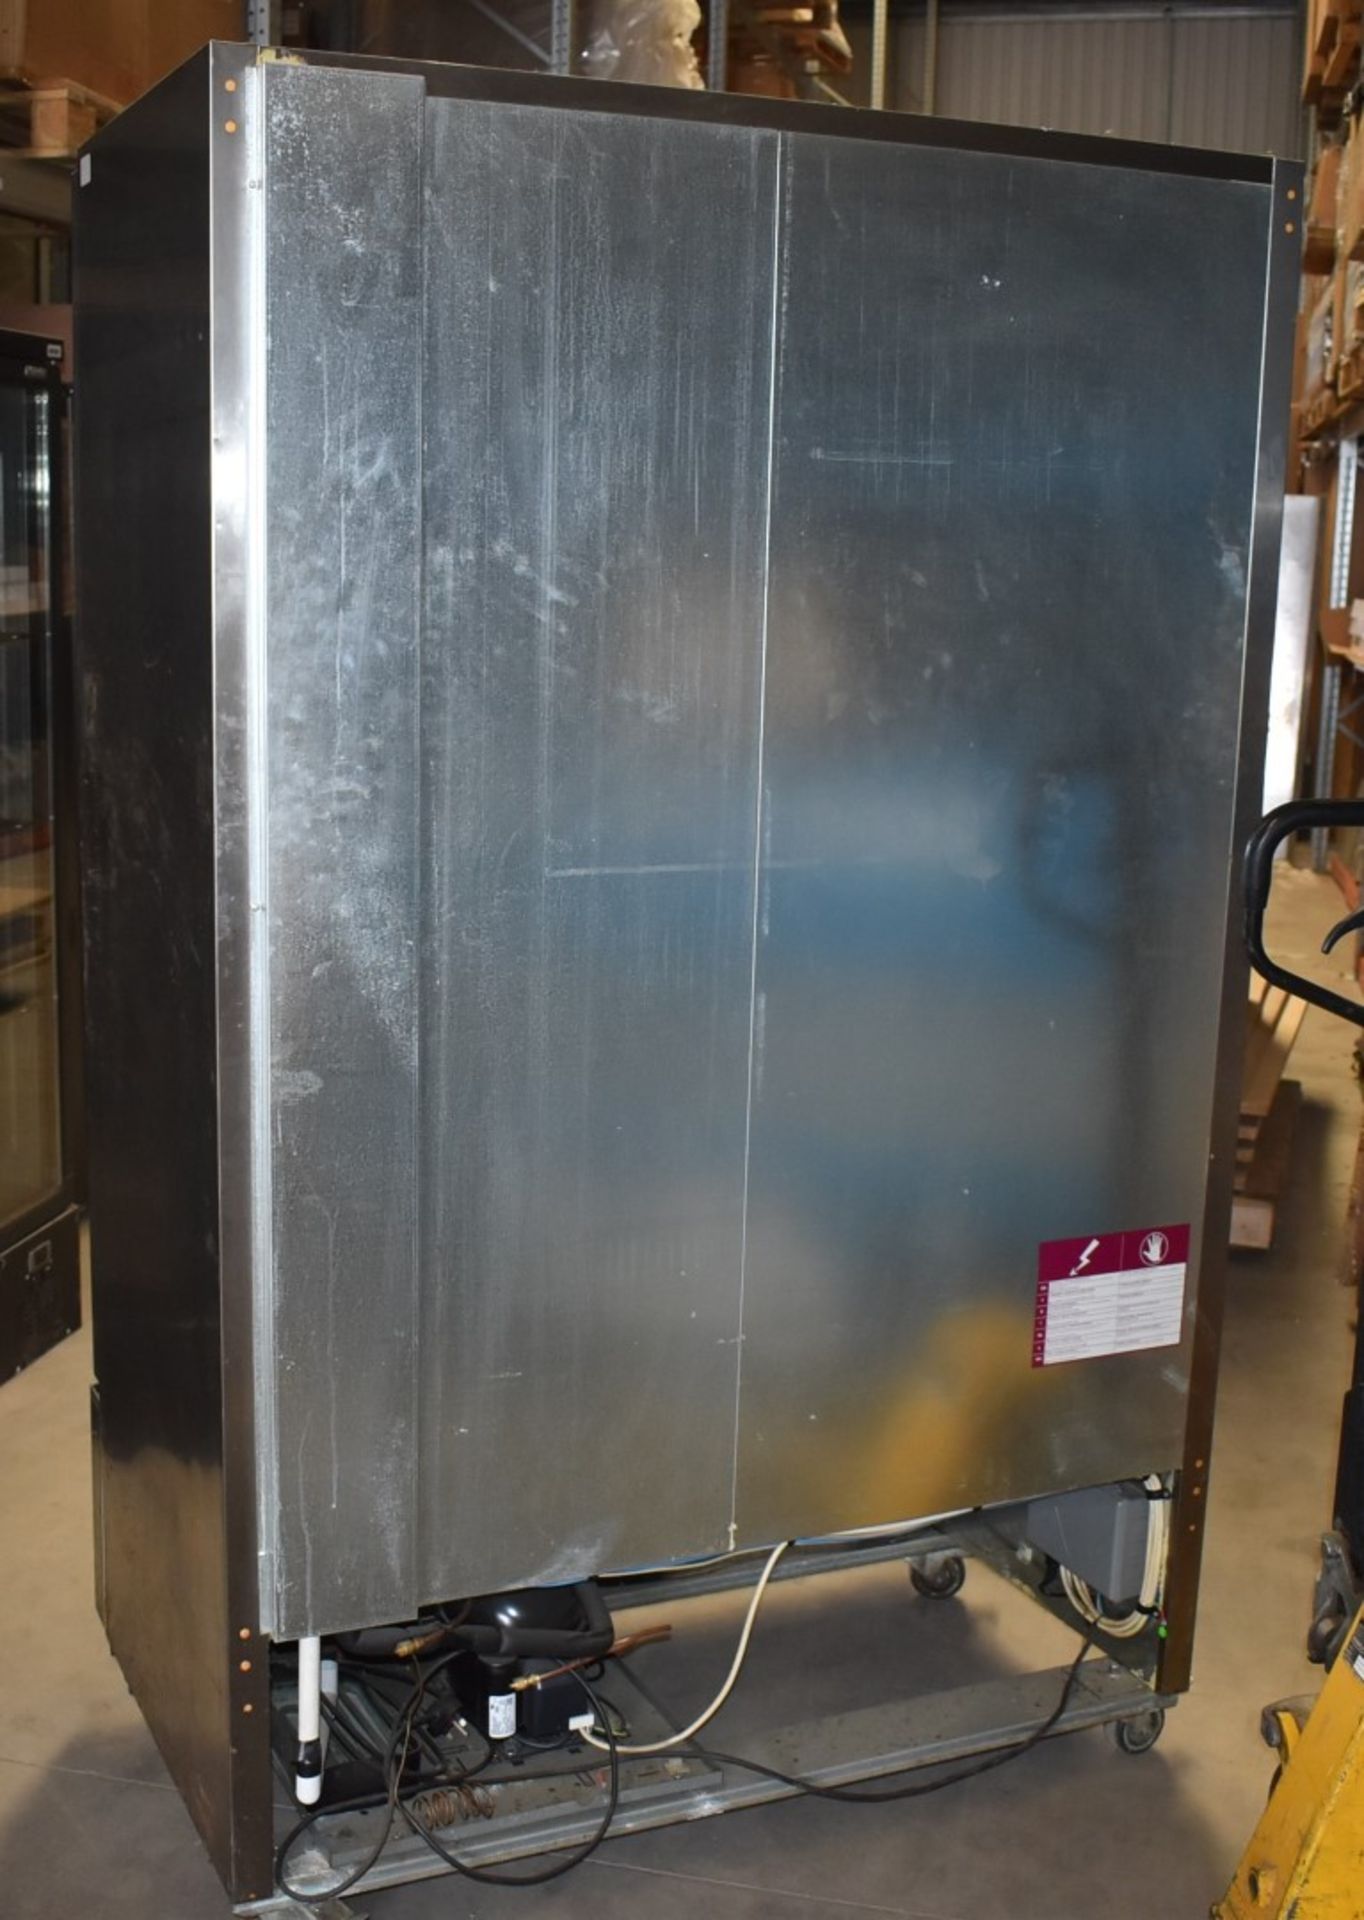 1 x Foster 800 Litre Double Door Meat Fridge With Stainless Steel Finish - Model FSL800M - H188 x - Image 8 of 8